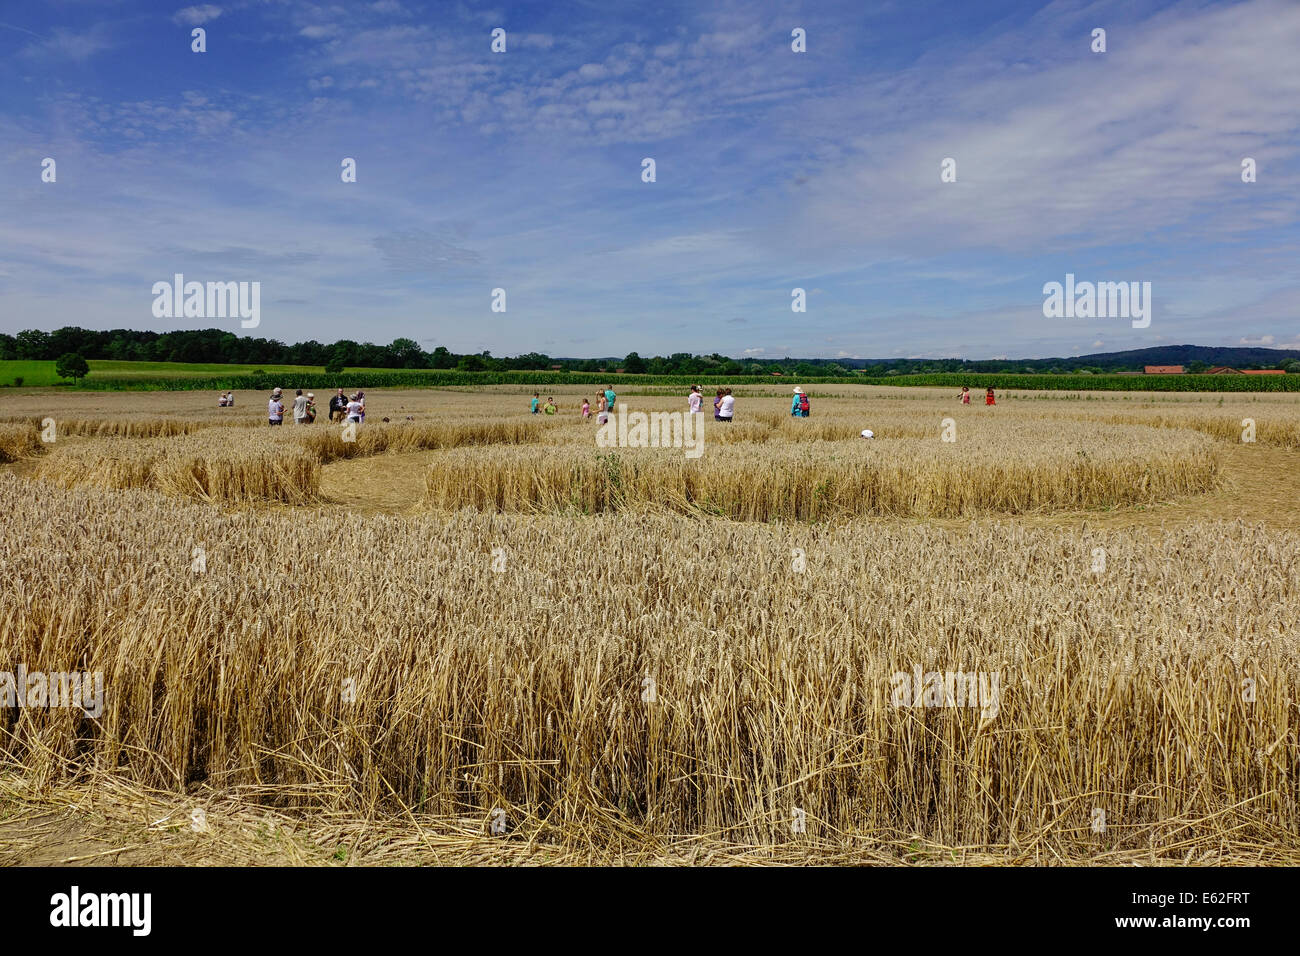 People admire a crop circle in a corn field at Rasiting, Upper Bavaria, Bavaria, Germany, Europe Stock Photo